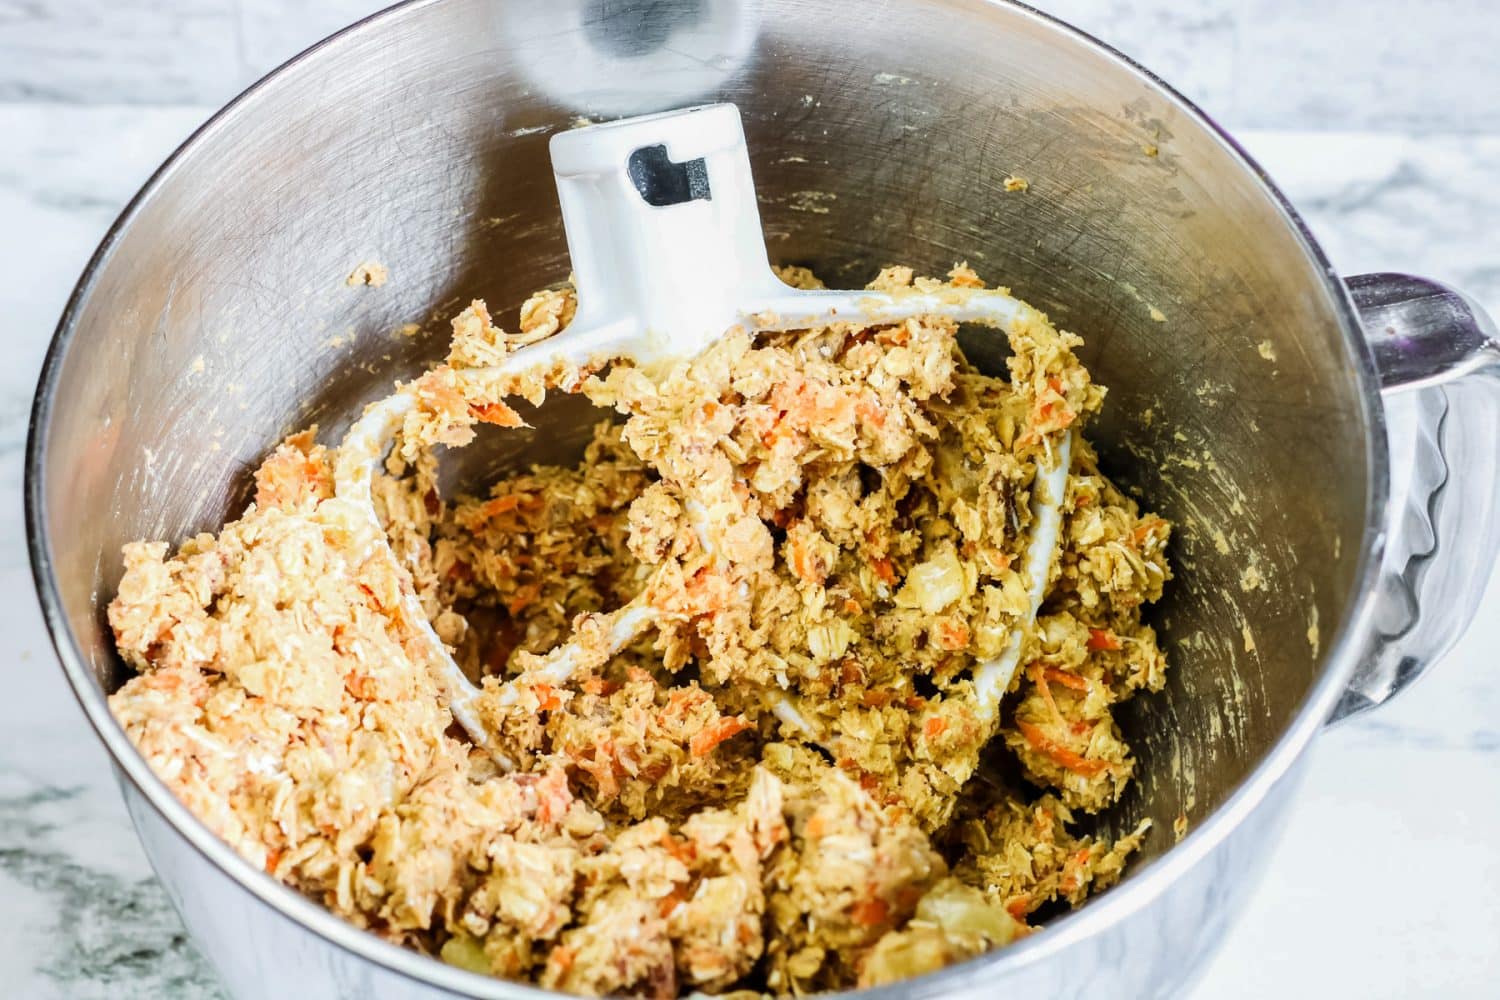 Batter for carrot oat cookies in a mixing bowl with an electric mixer paddle in the dough.